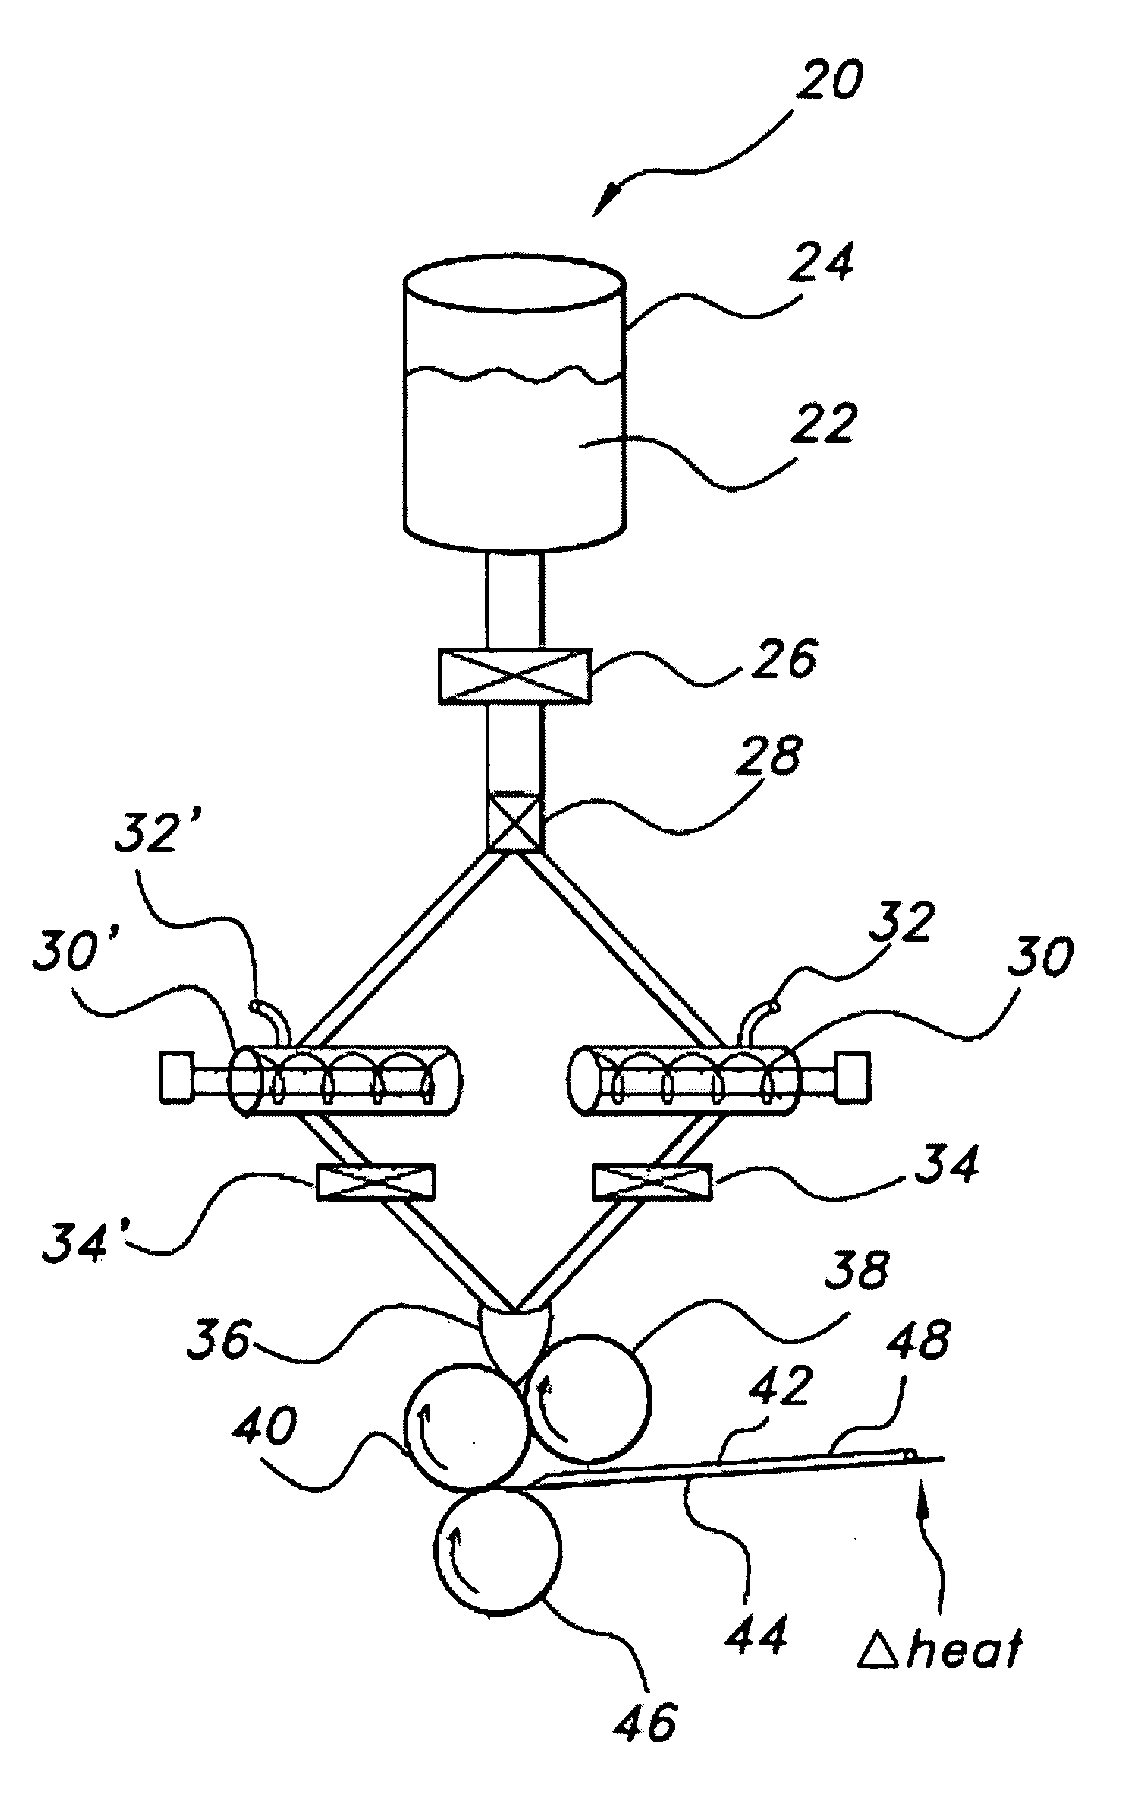 Film shreds and delivery system incorporating same